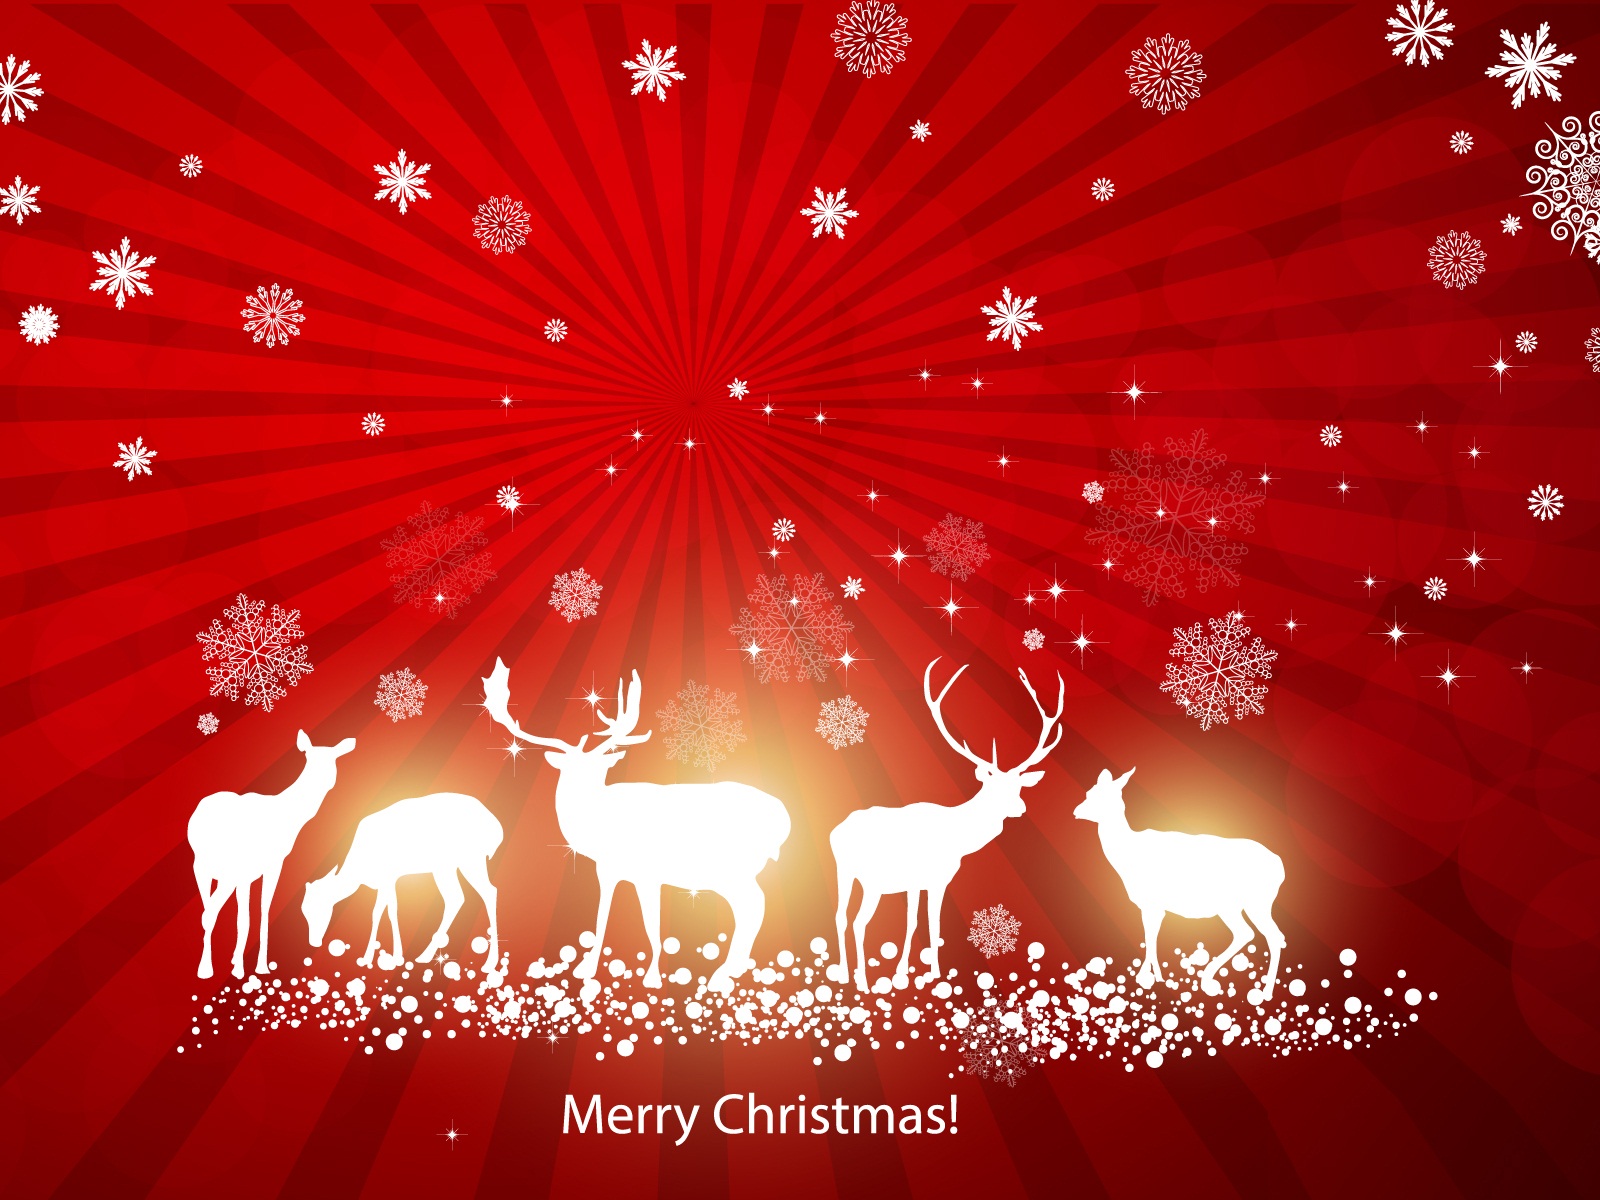 Free download holiday green screen background [480x600] for your